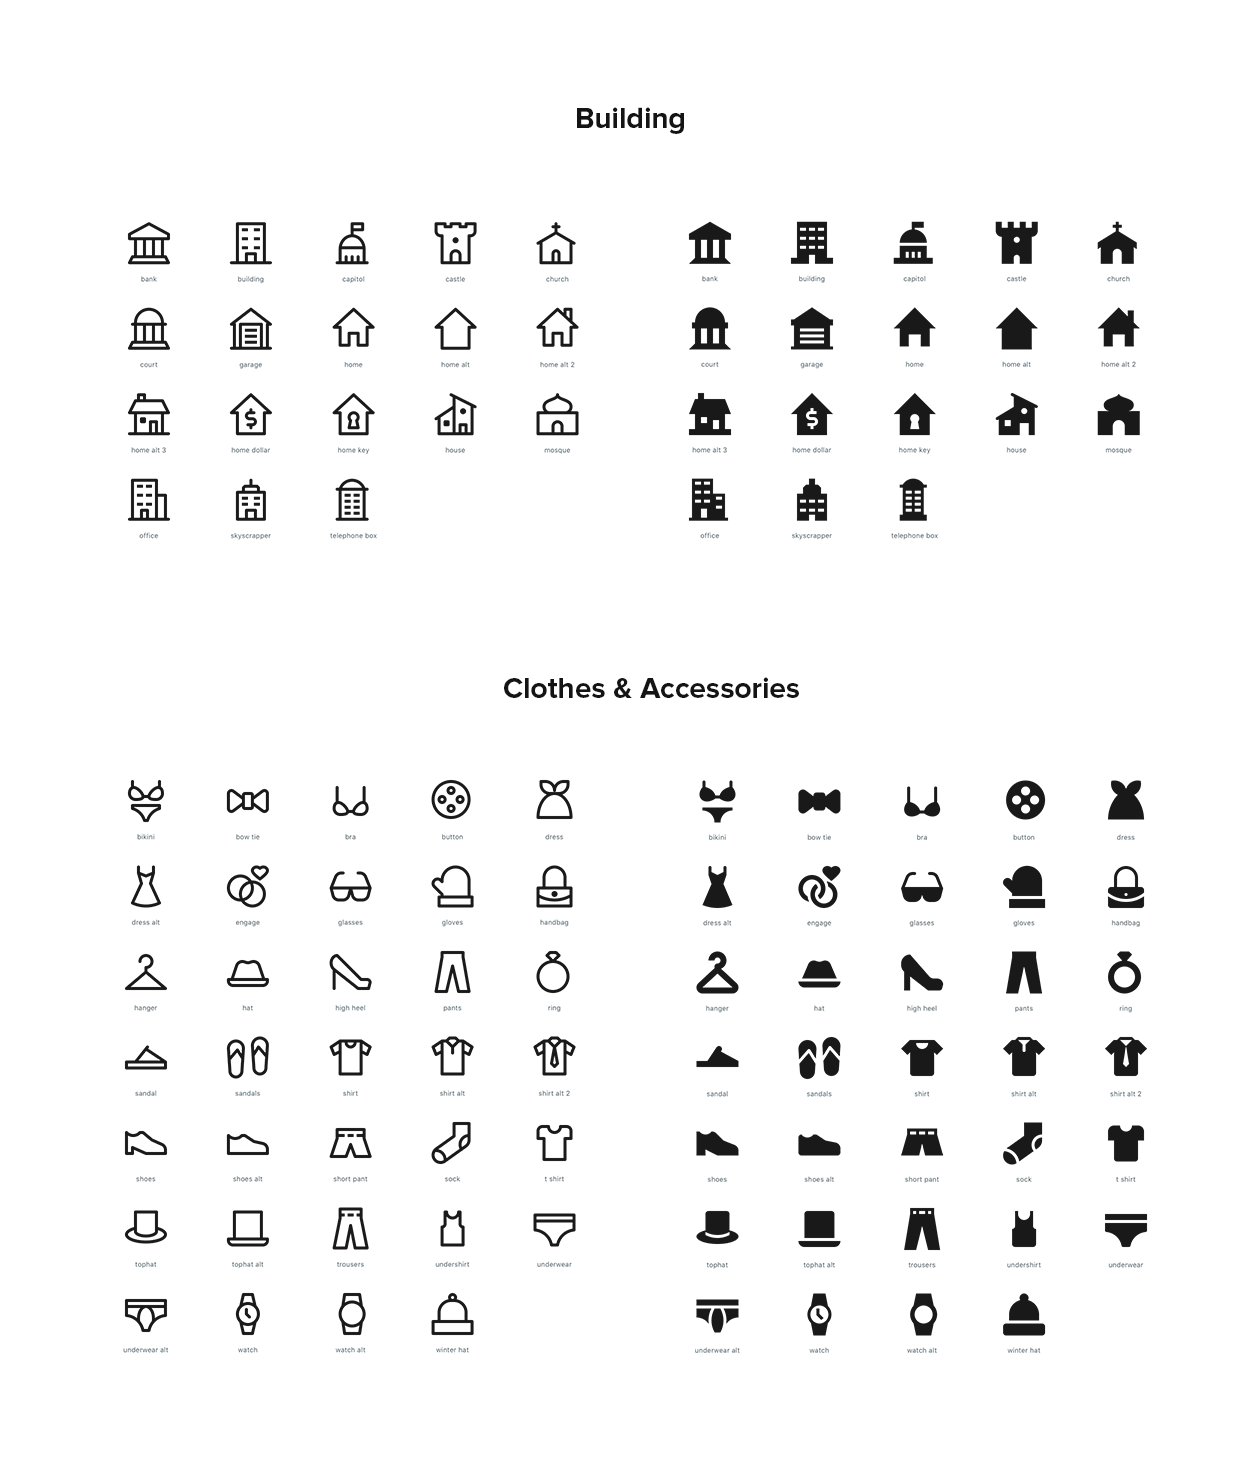 Buildings and clothes icons.